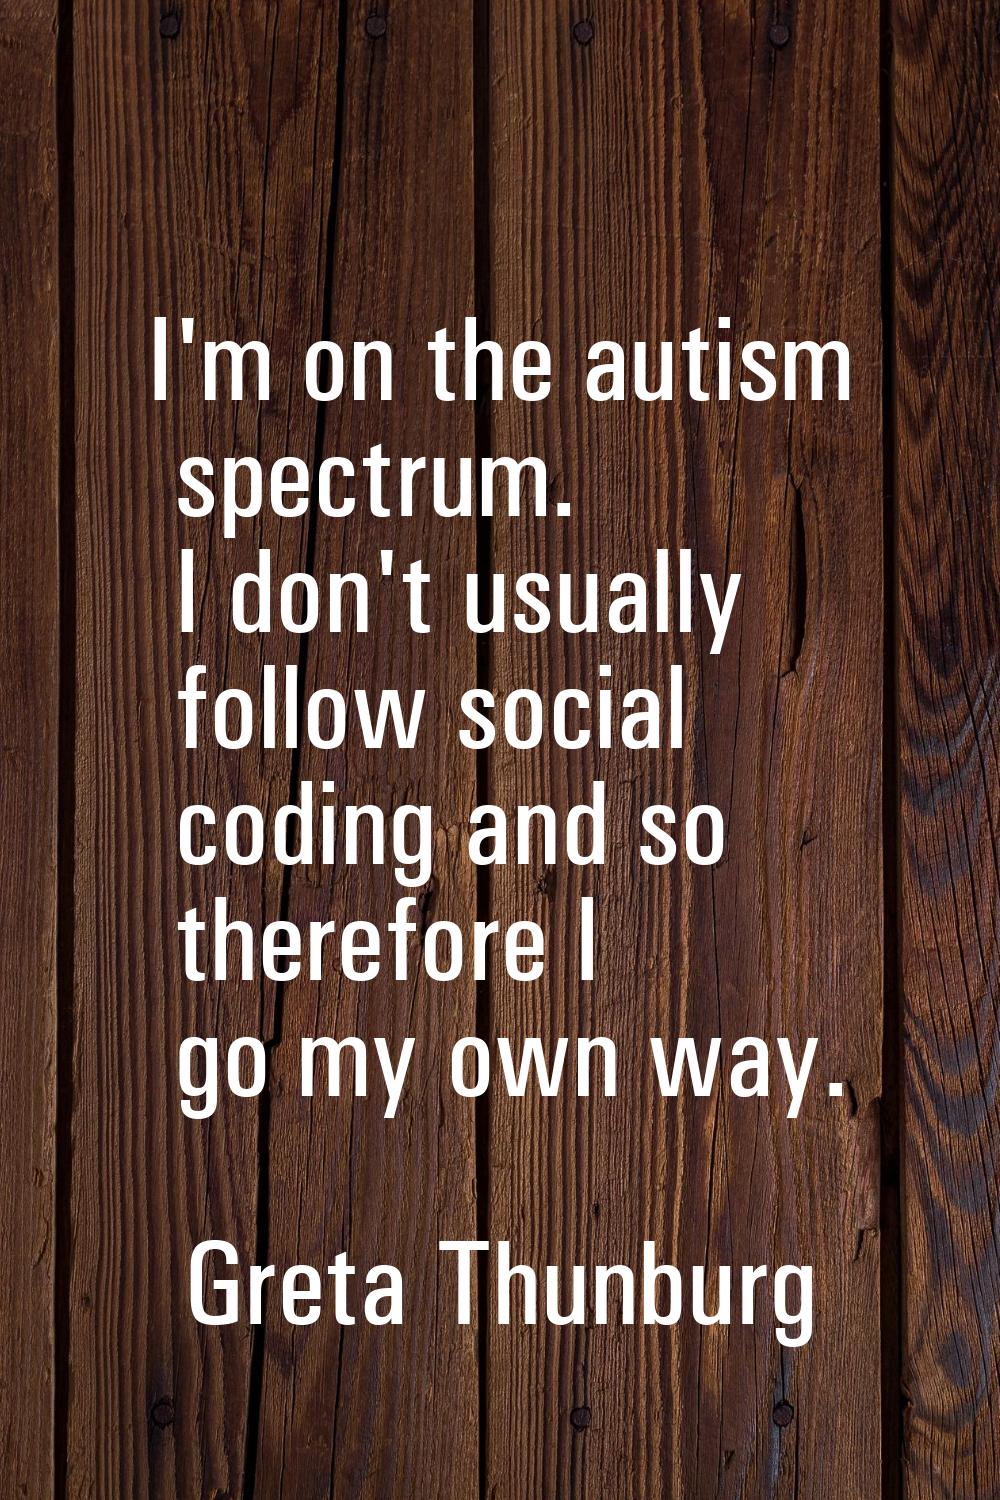 I'm on the autism spectrum. I don't usually follow social coding and so therefore I go my own way.